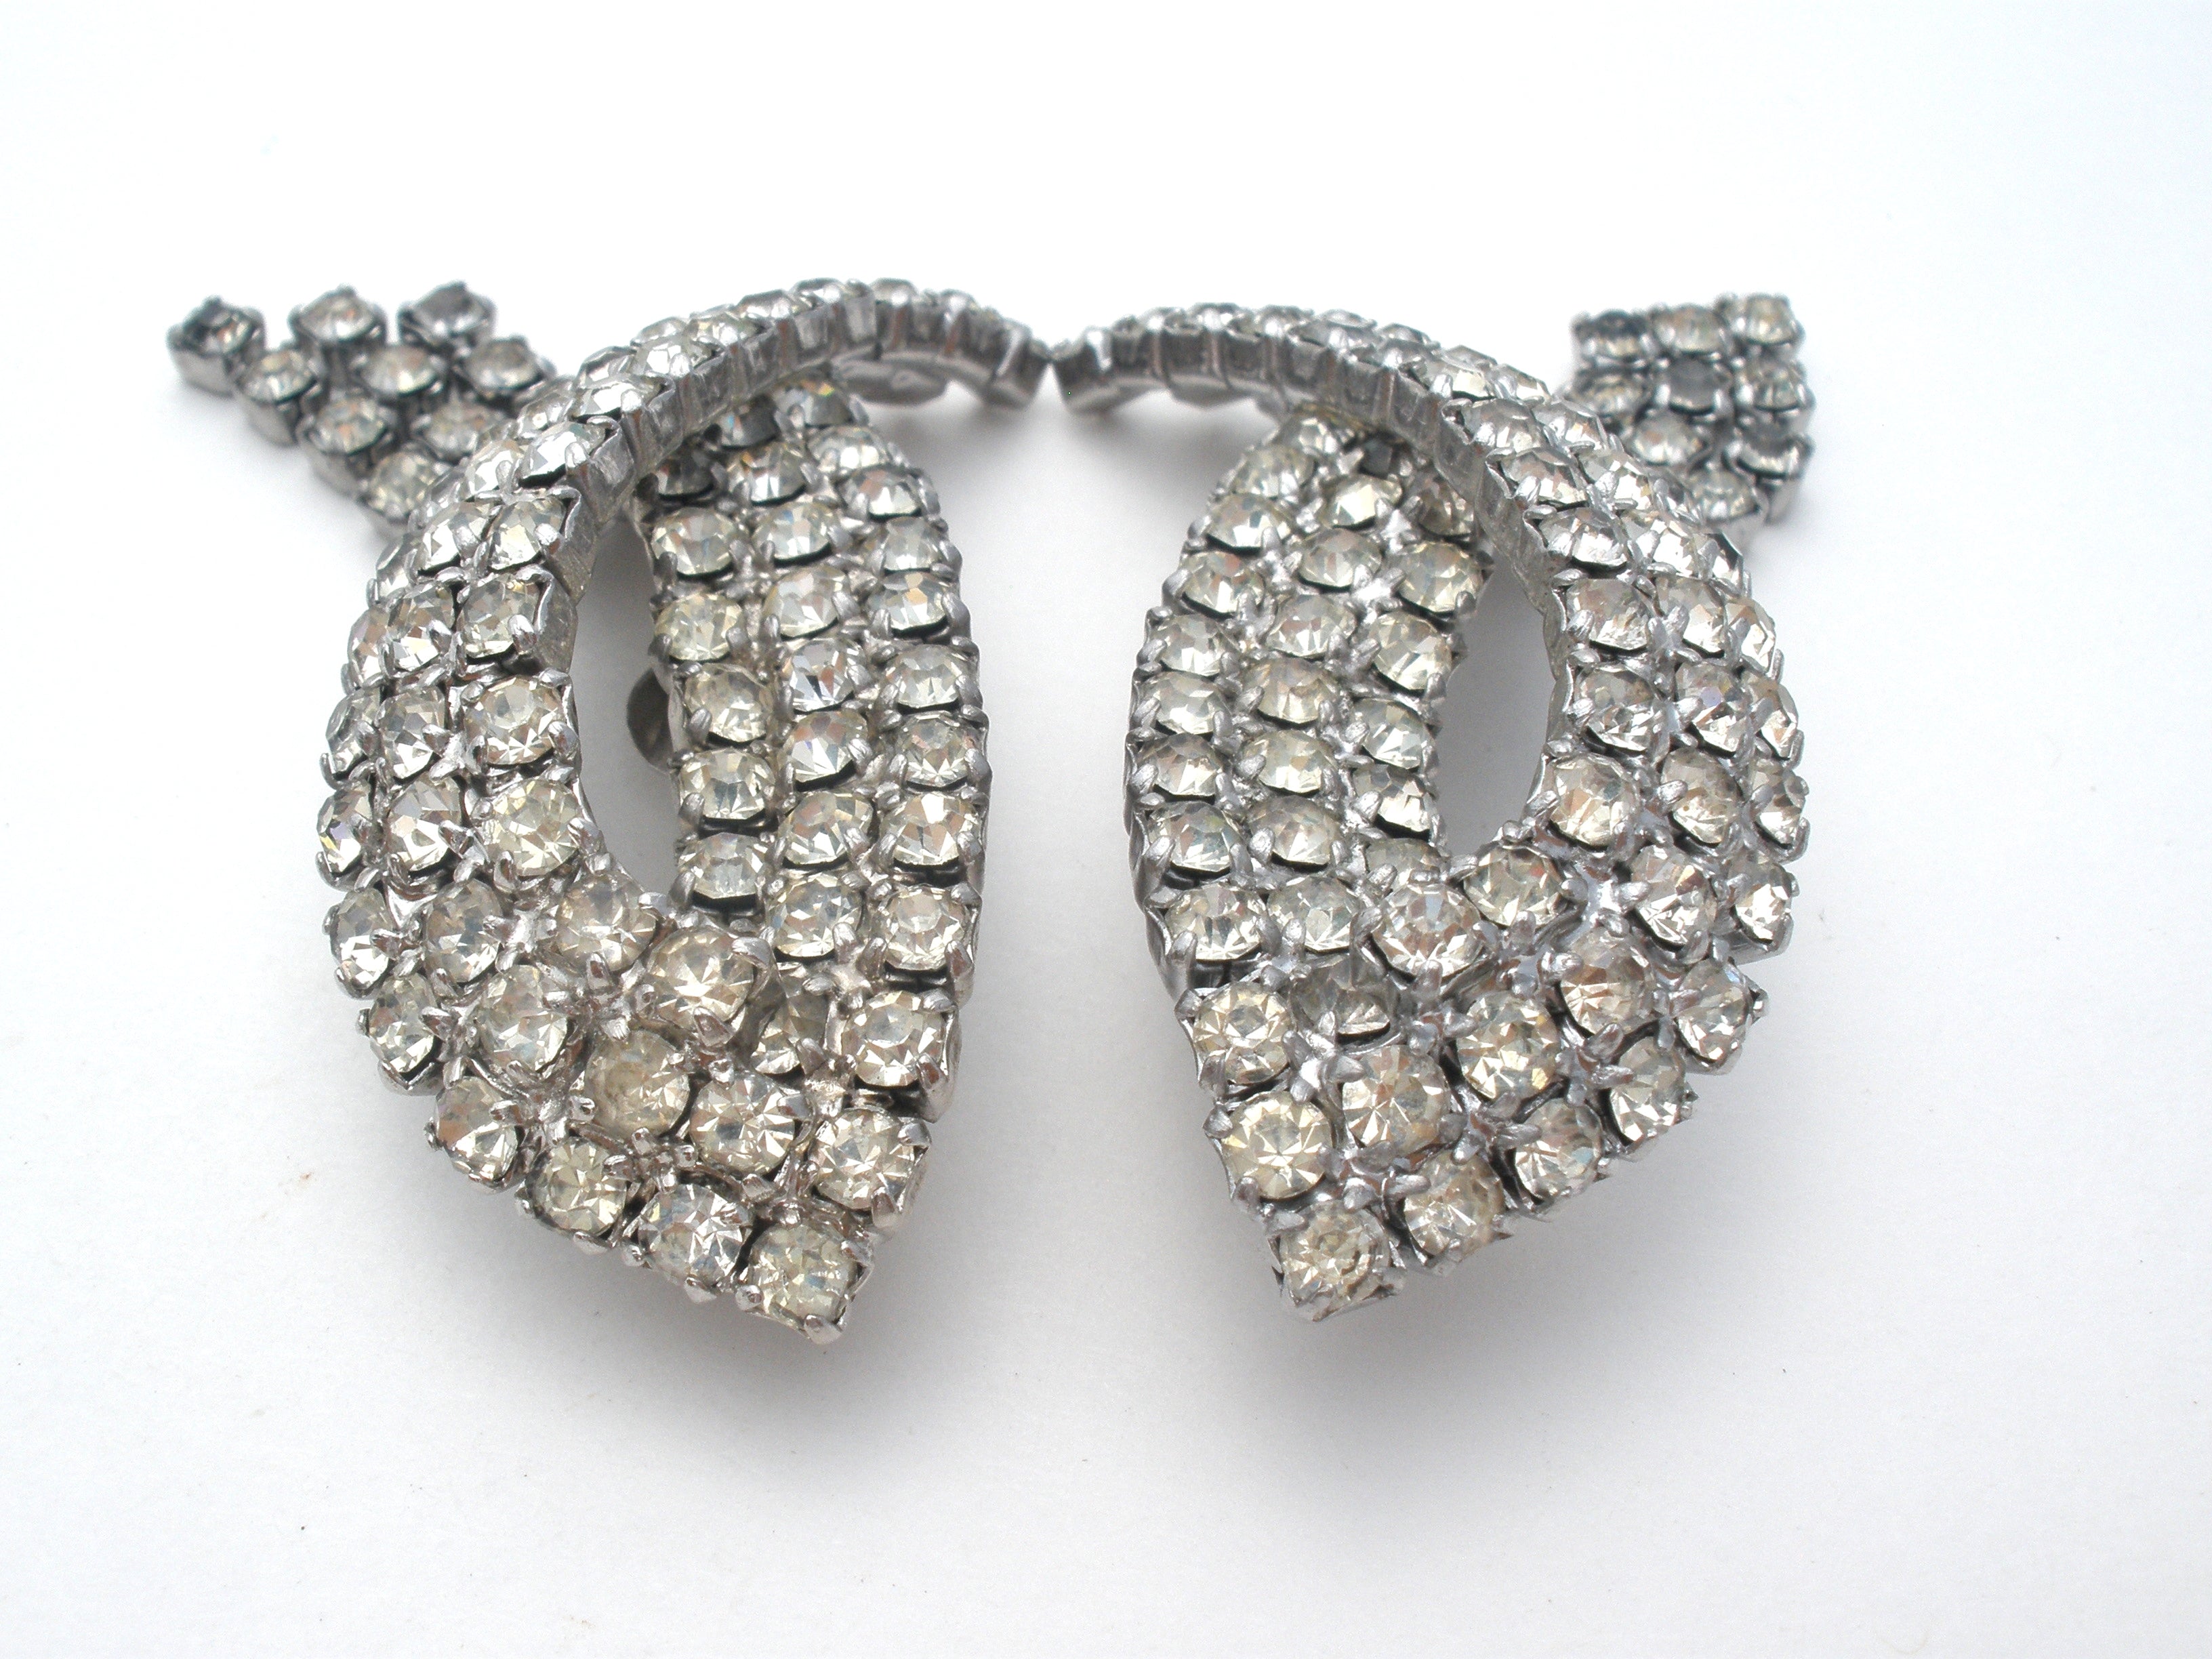 Rhinestone Shoe Clips - Vintage Tip Toe Shoe Clips - Old Store